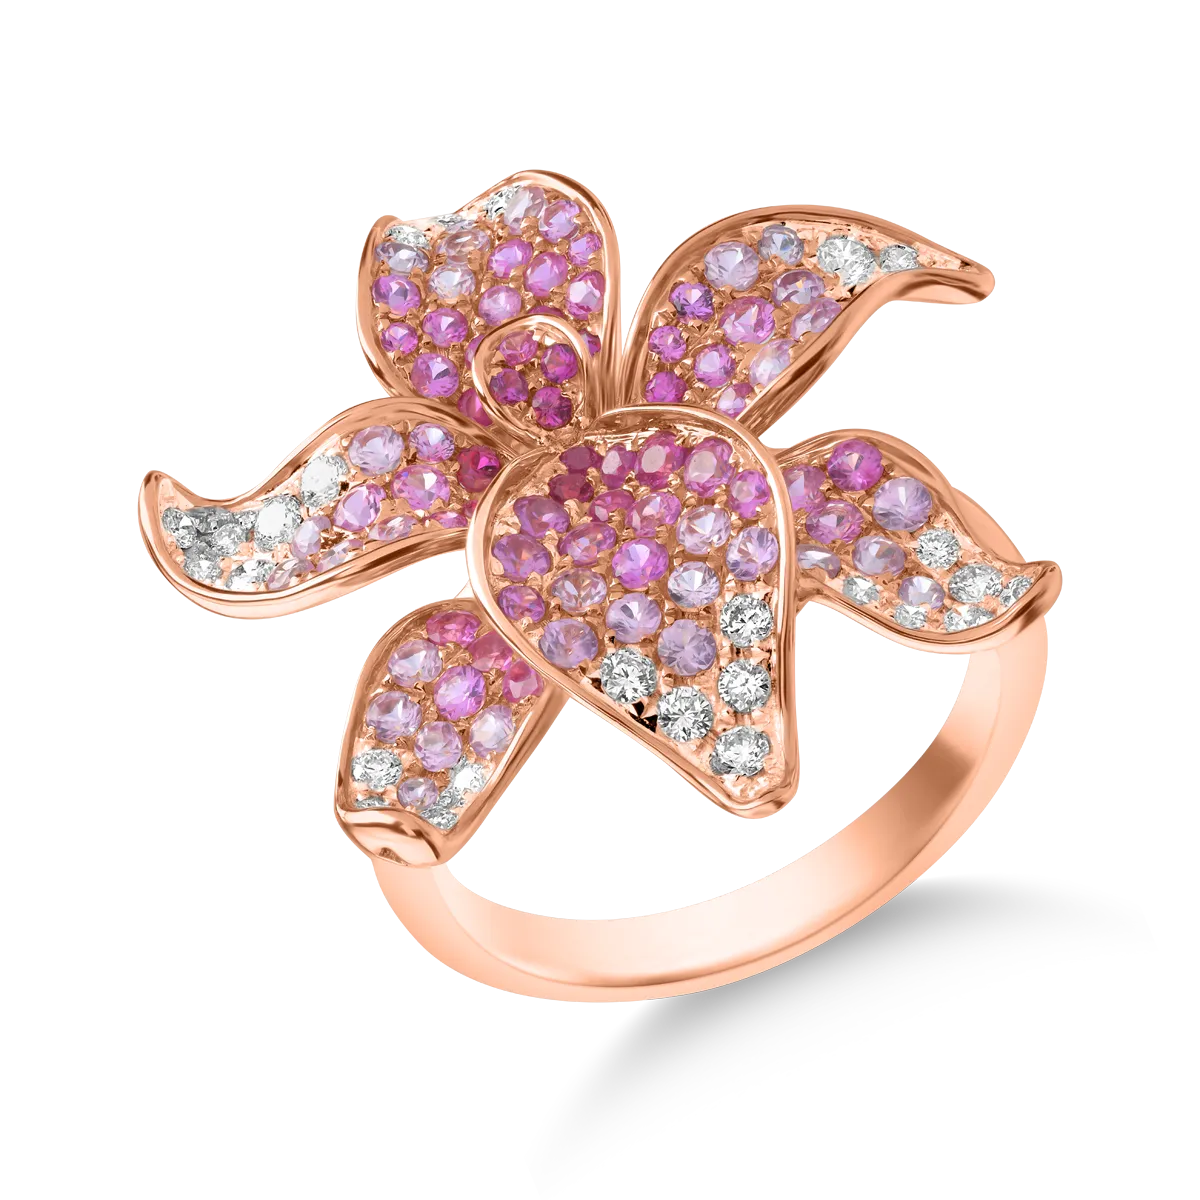 18K rose gold flower ring with 1.64ct precious stones